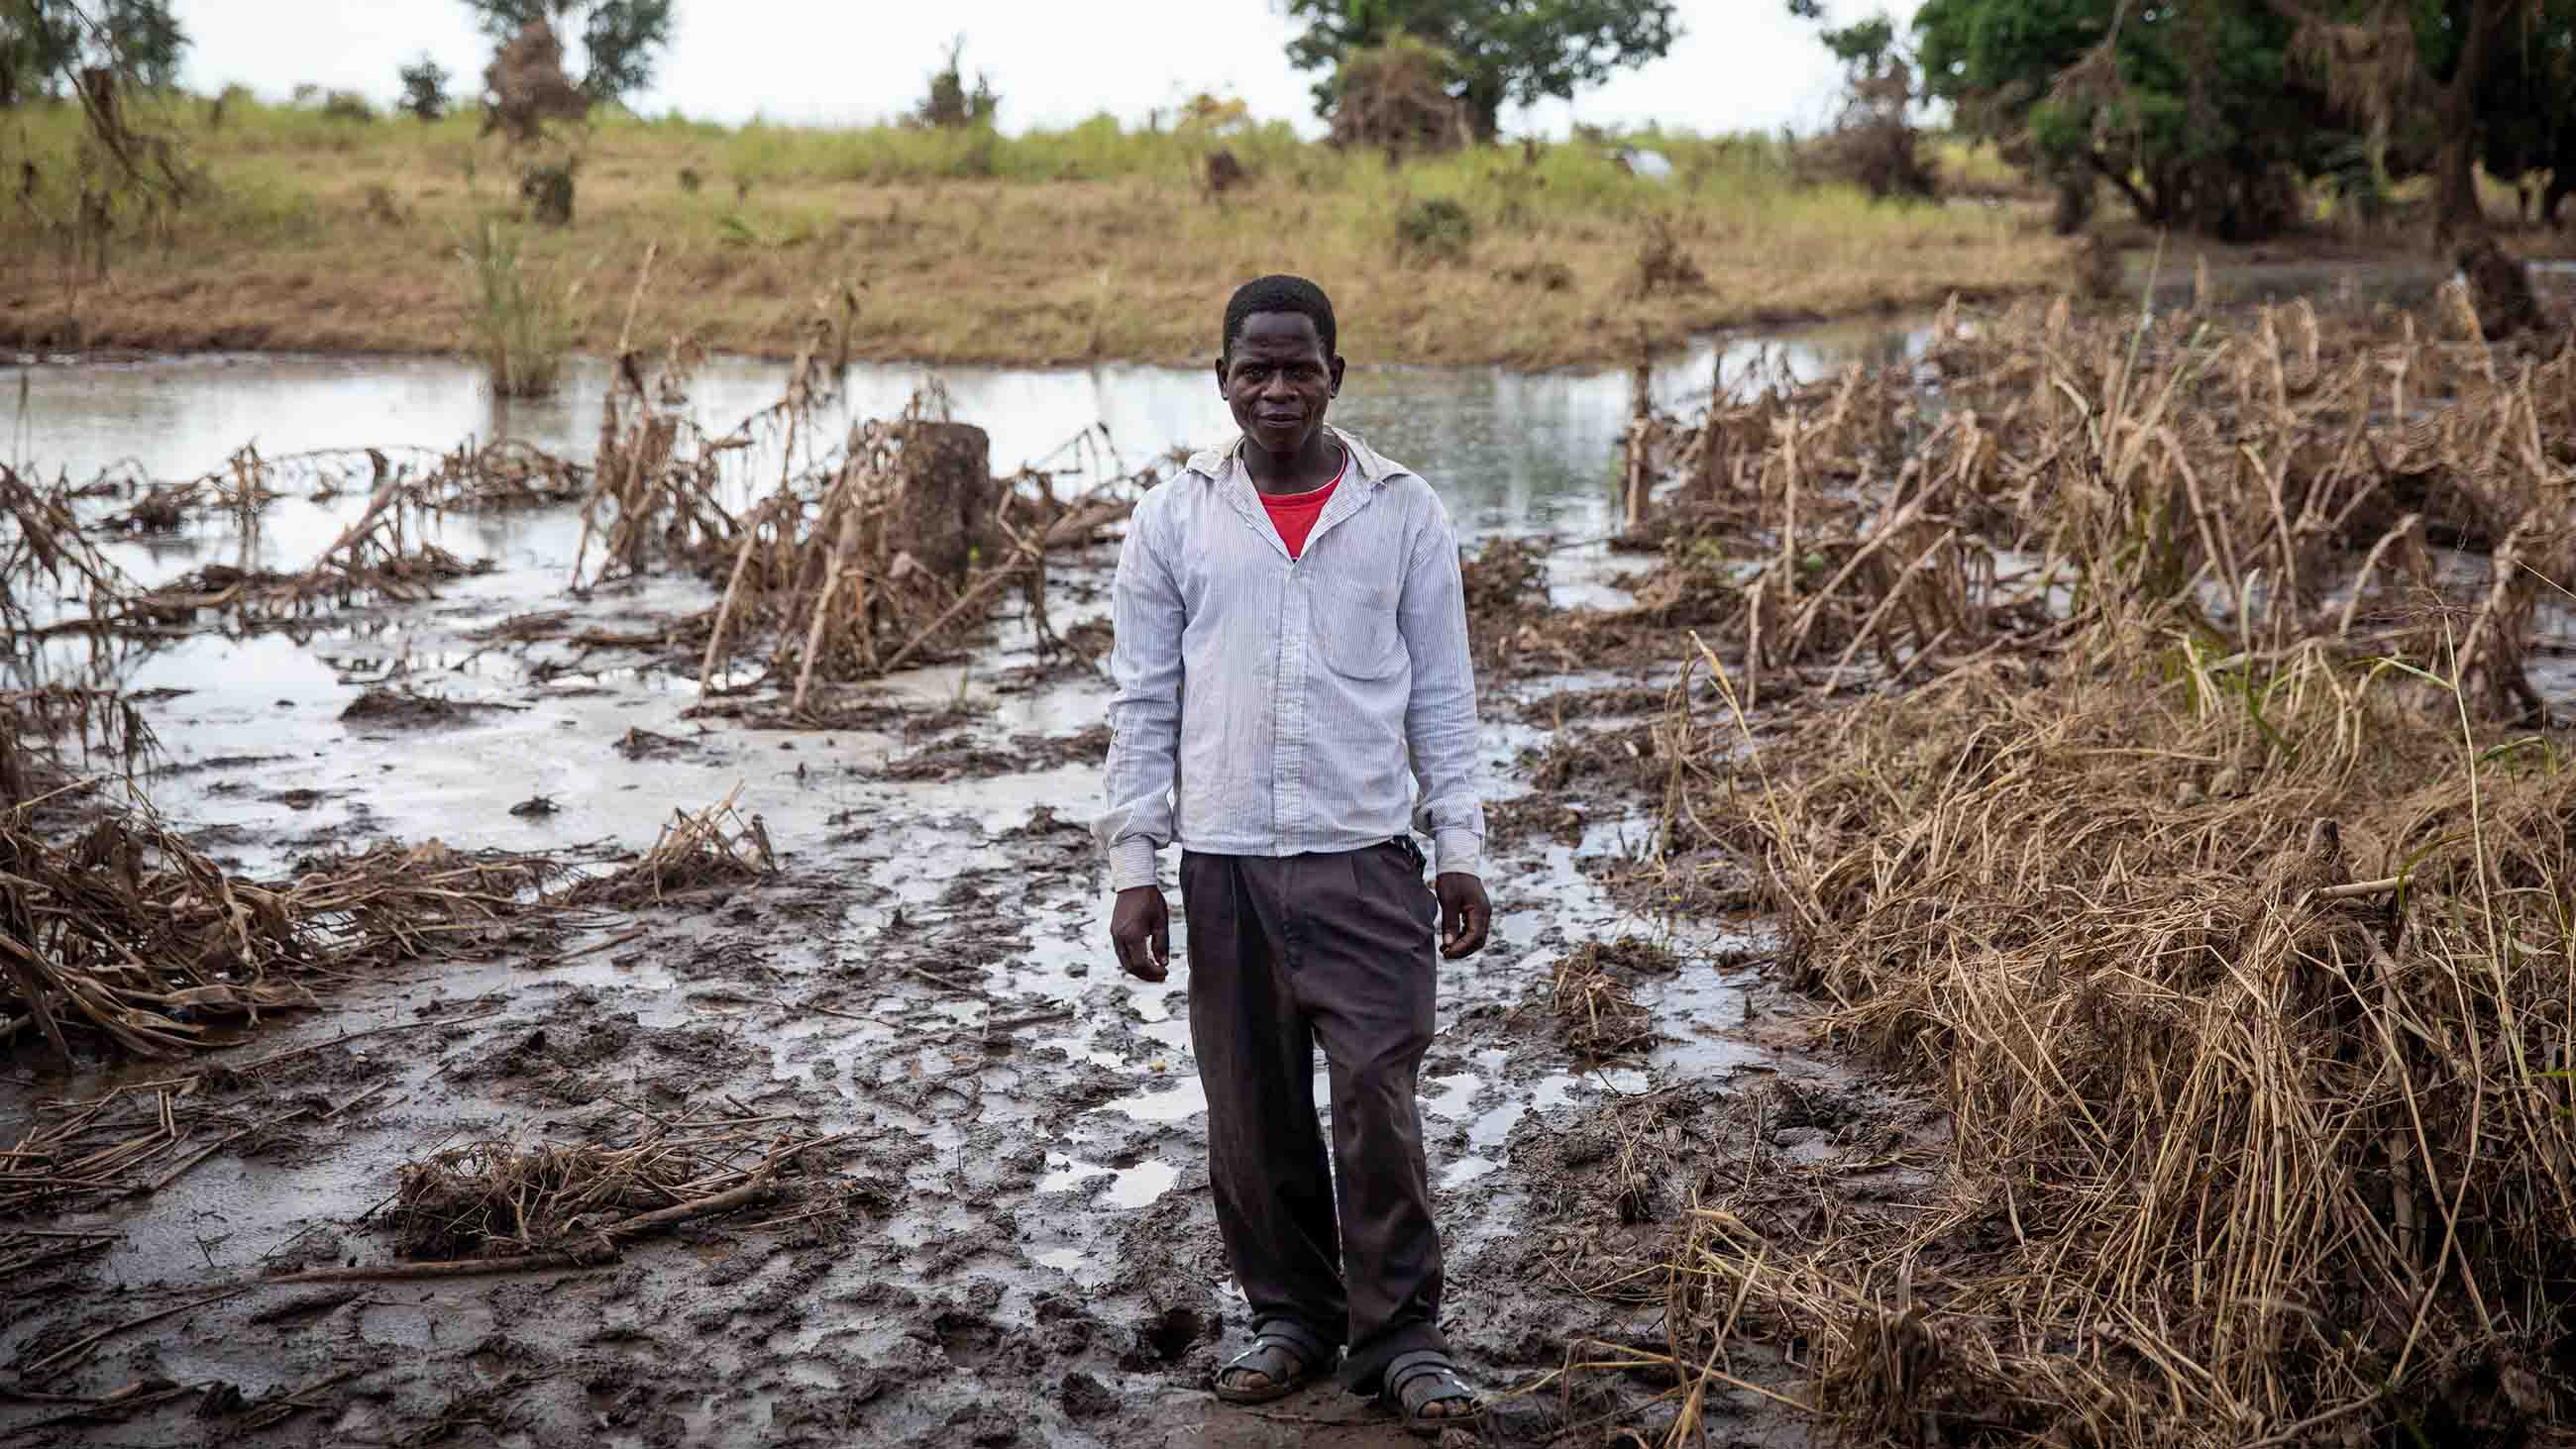 Local farmer, Armando, stands on land where his home once stood in a village near Sofala province on March 26, 2019 in Sofala, Mozambique. Tropical Cyclone Idai is considered one of the worst cyclones to affect Africa as it swept through Malawi, Zimbabwe and Mozambique leaving hundreds dead and an estimated three million people displaced.